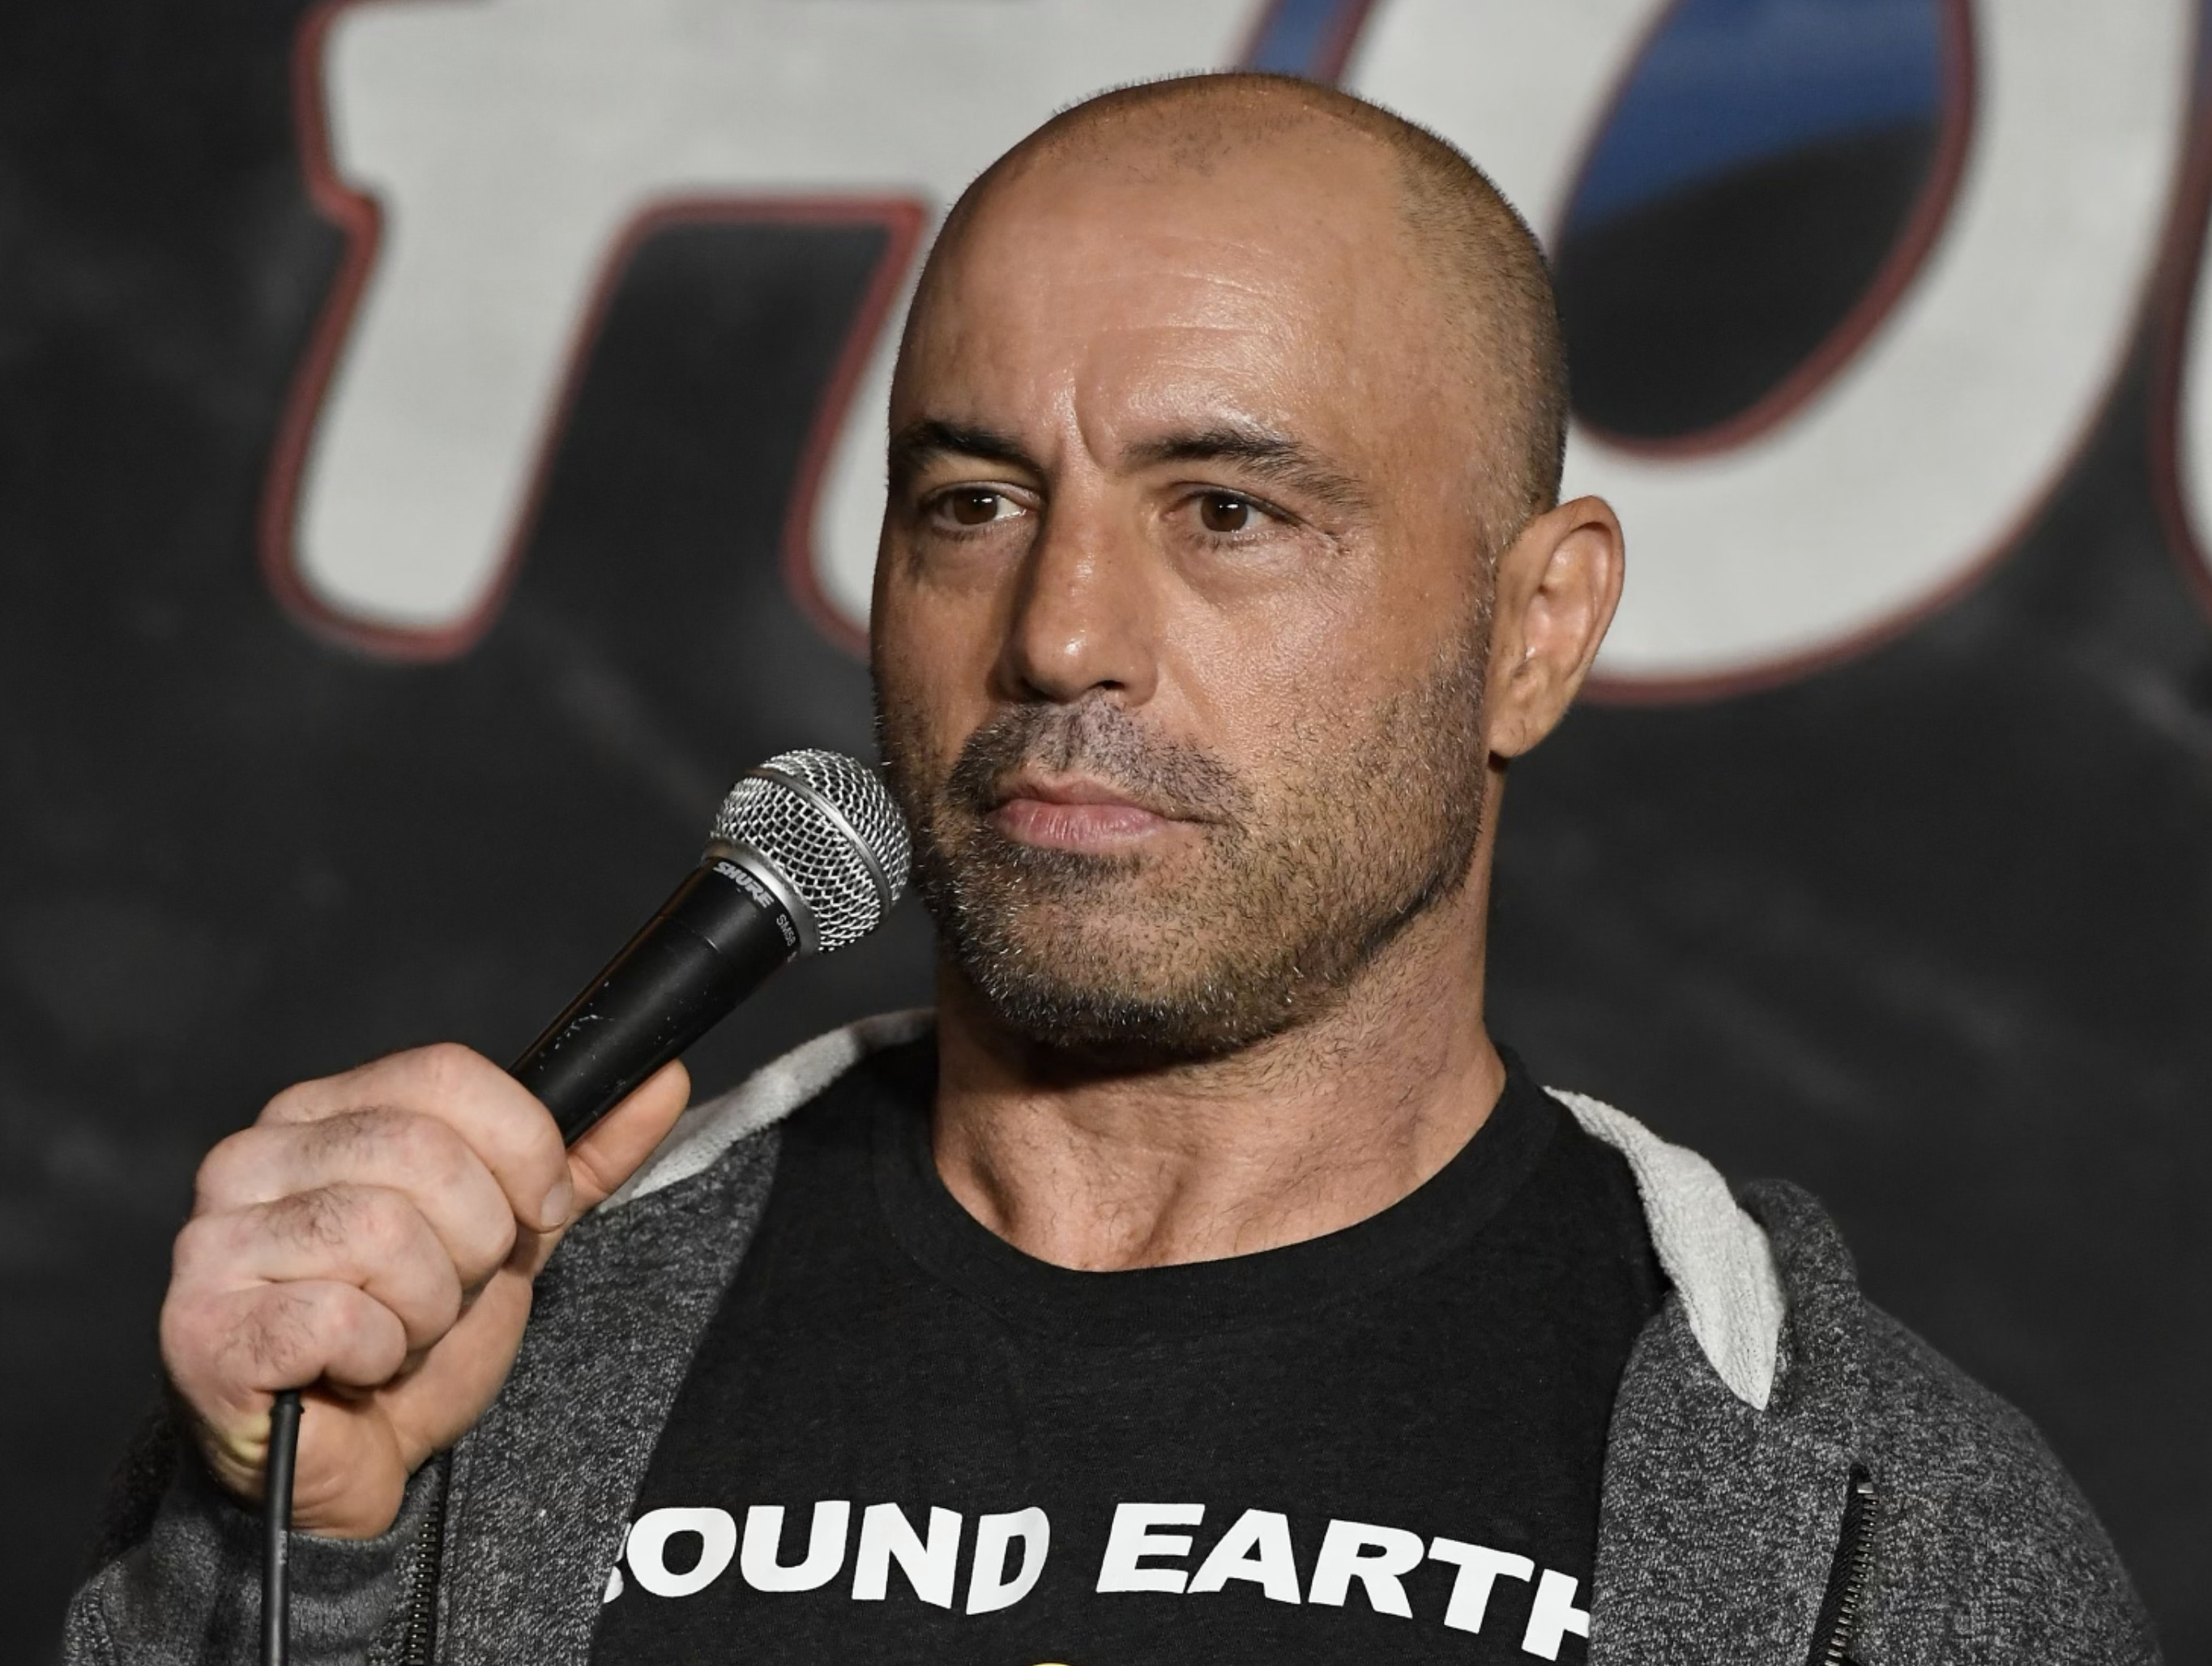 Joe Rogan Apologizes After N-Word Compilation Video Surfaces & Spotify Removes 70 Episodes